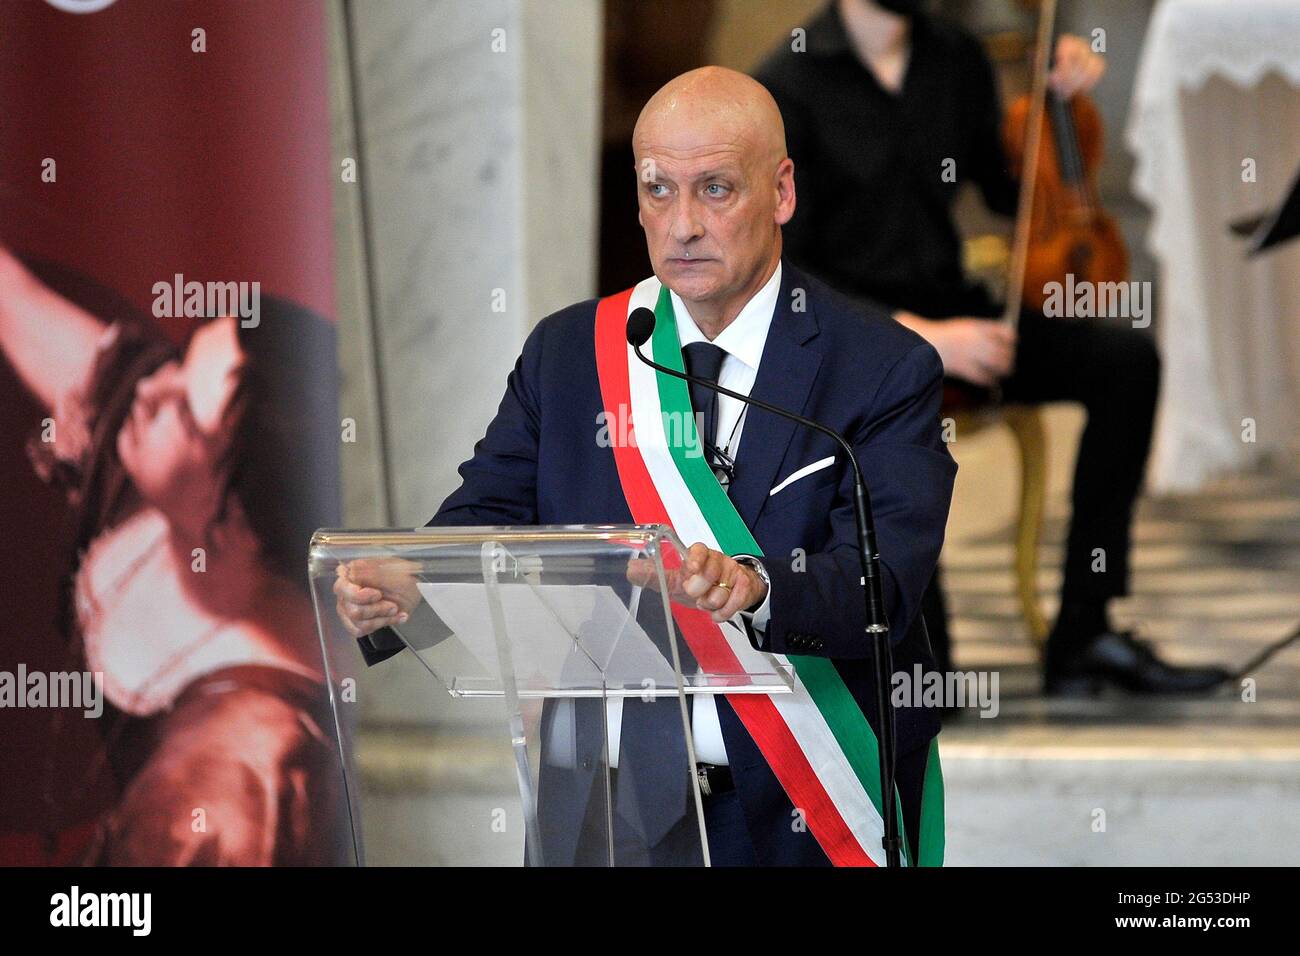 Pozzuoli, Italy. 25th June, 2021. Vincenzo Figliolia mayor of the city of  Pozzuoli (NA), during the inauguration of the "Puteoli Sacra" project  inside the Cathedral of the Rione Terra di Pozzuoli. Pozzuoli,